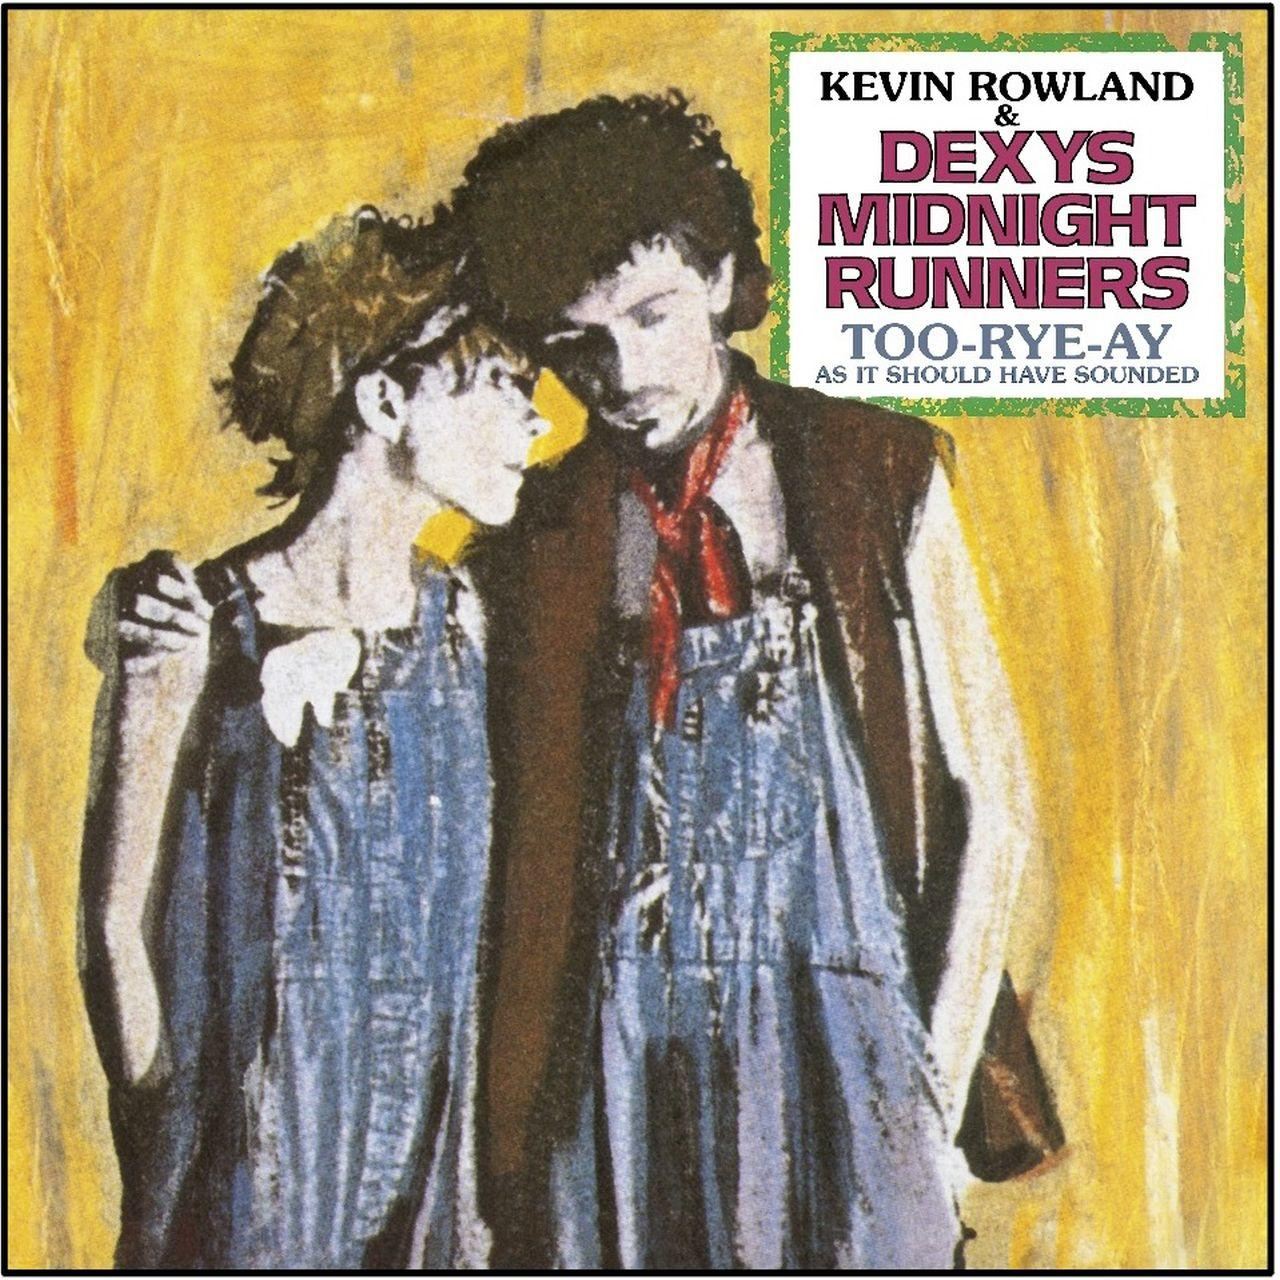 Kevin Rowland & Dexy\'s It Runners Anniversary (40th As - Edition) Sounded Should - (Deluxe Too-Rye-Ay, (CD) Midnight Remix) Have